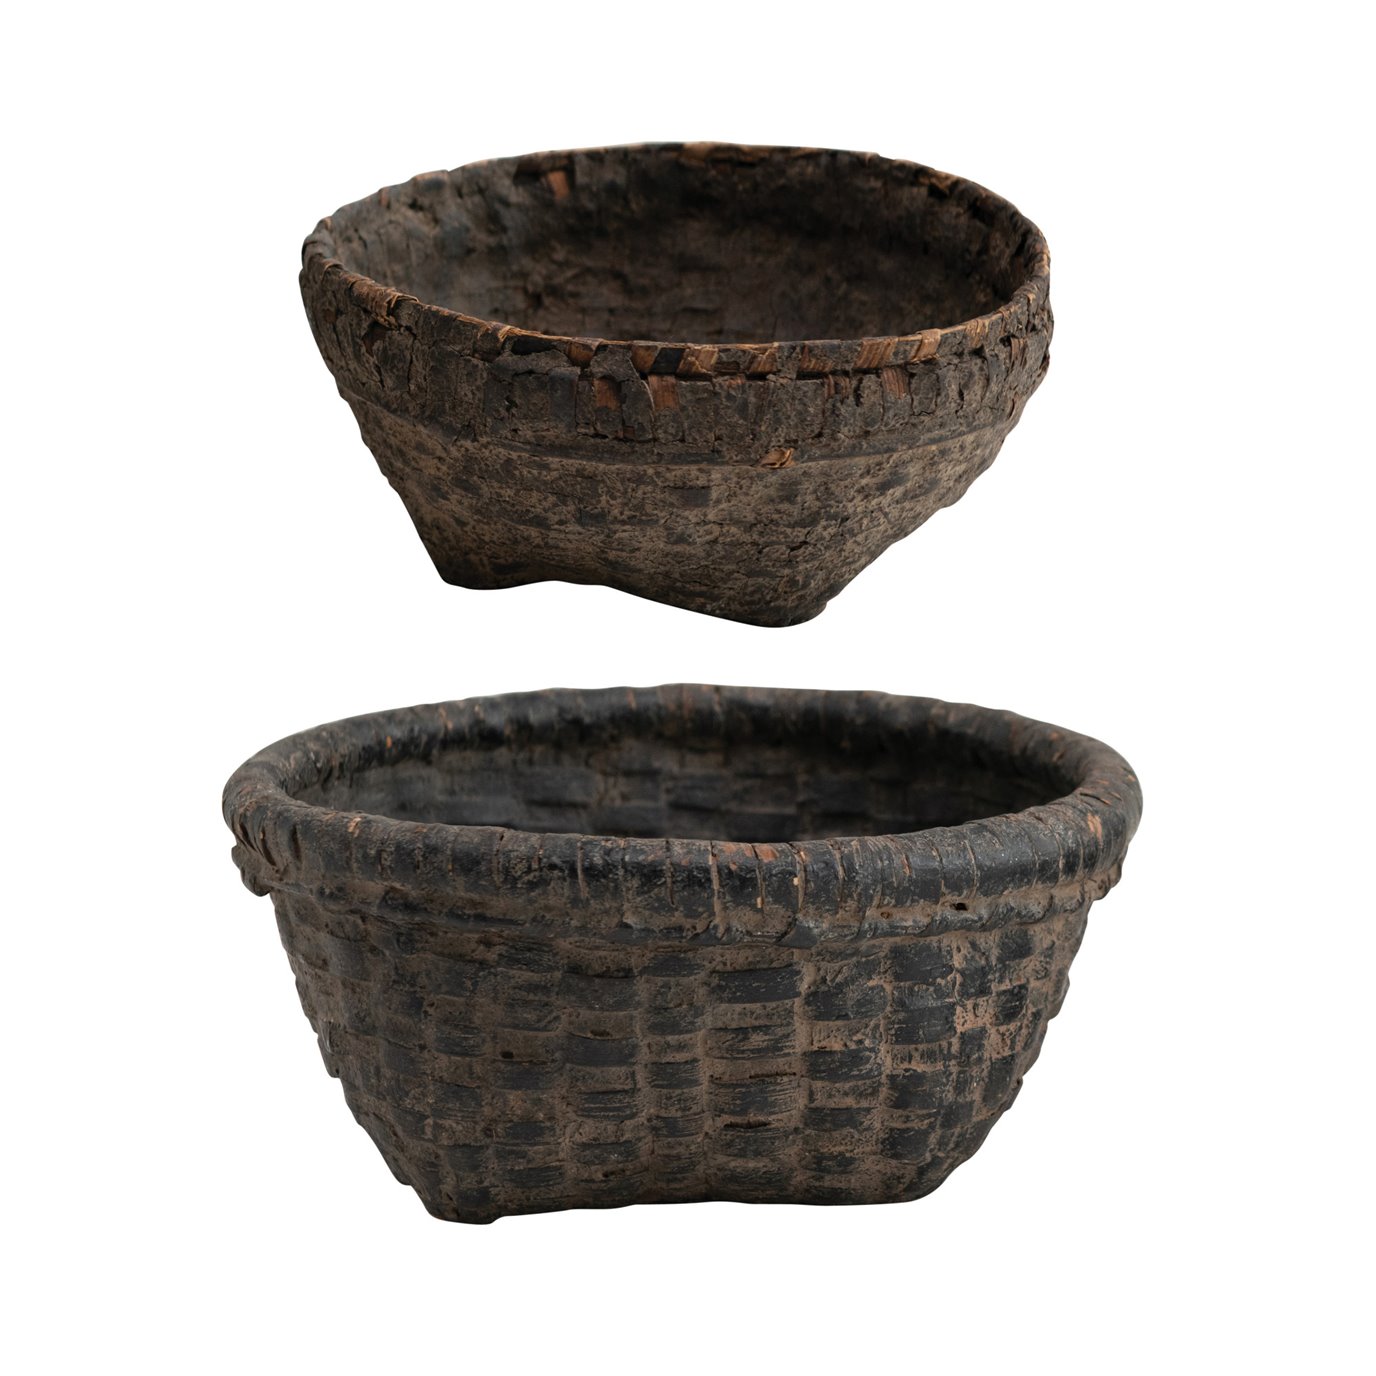 Found Decorative Cane Basket, Distressed Black (Each One Will Vary)